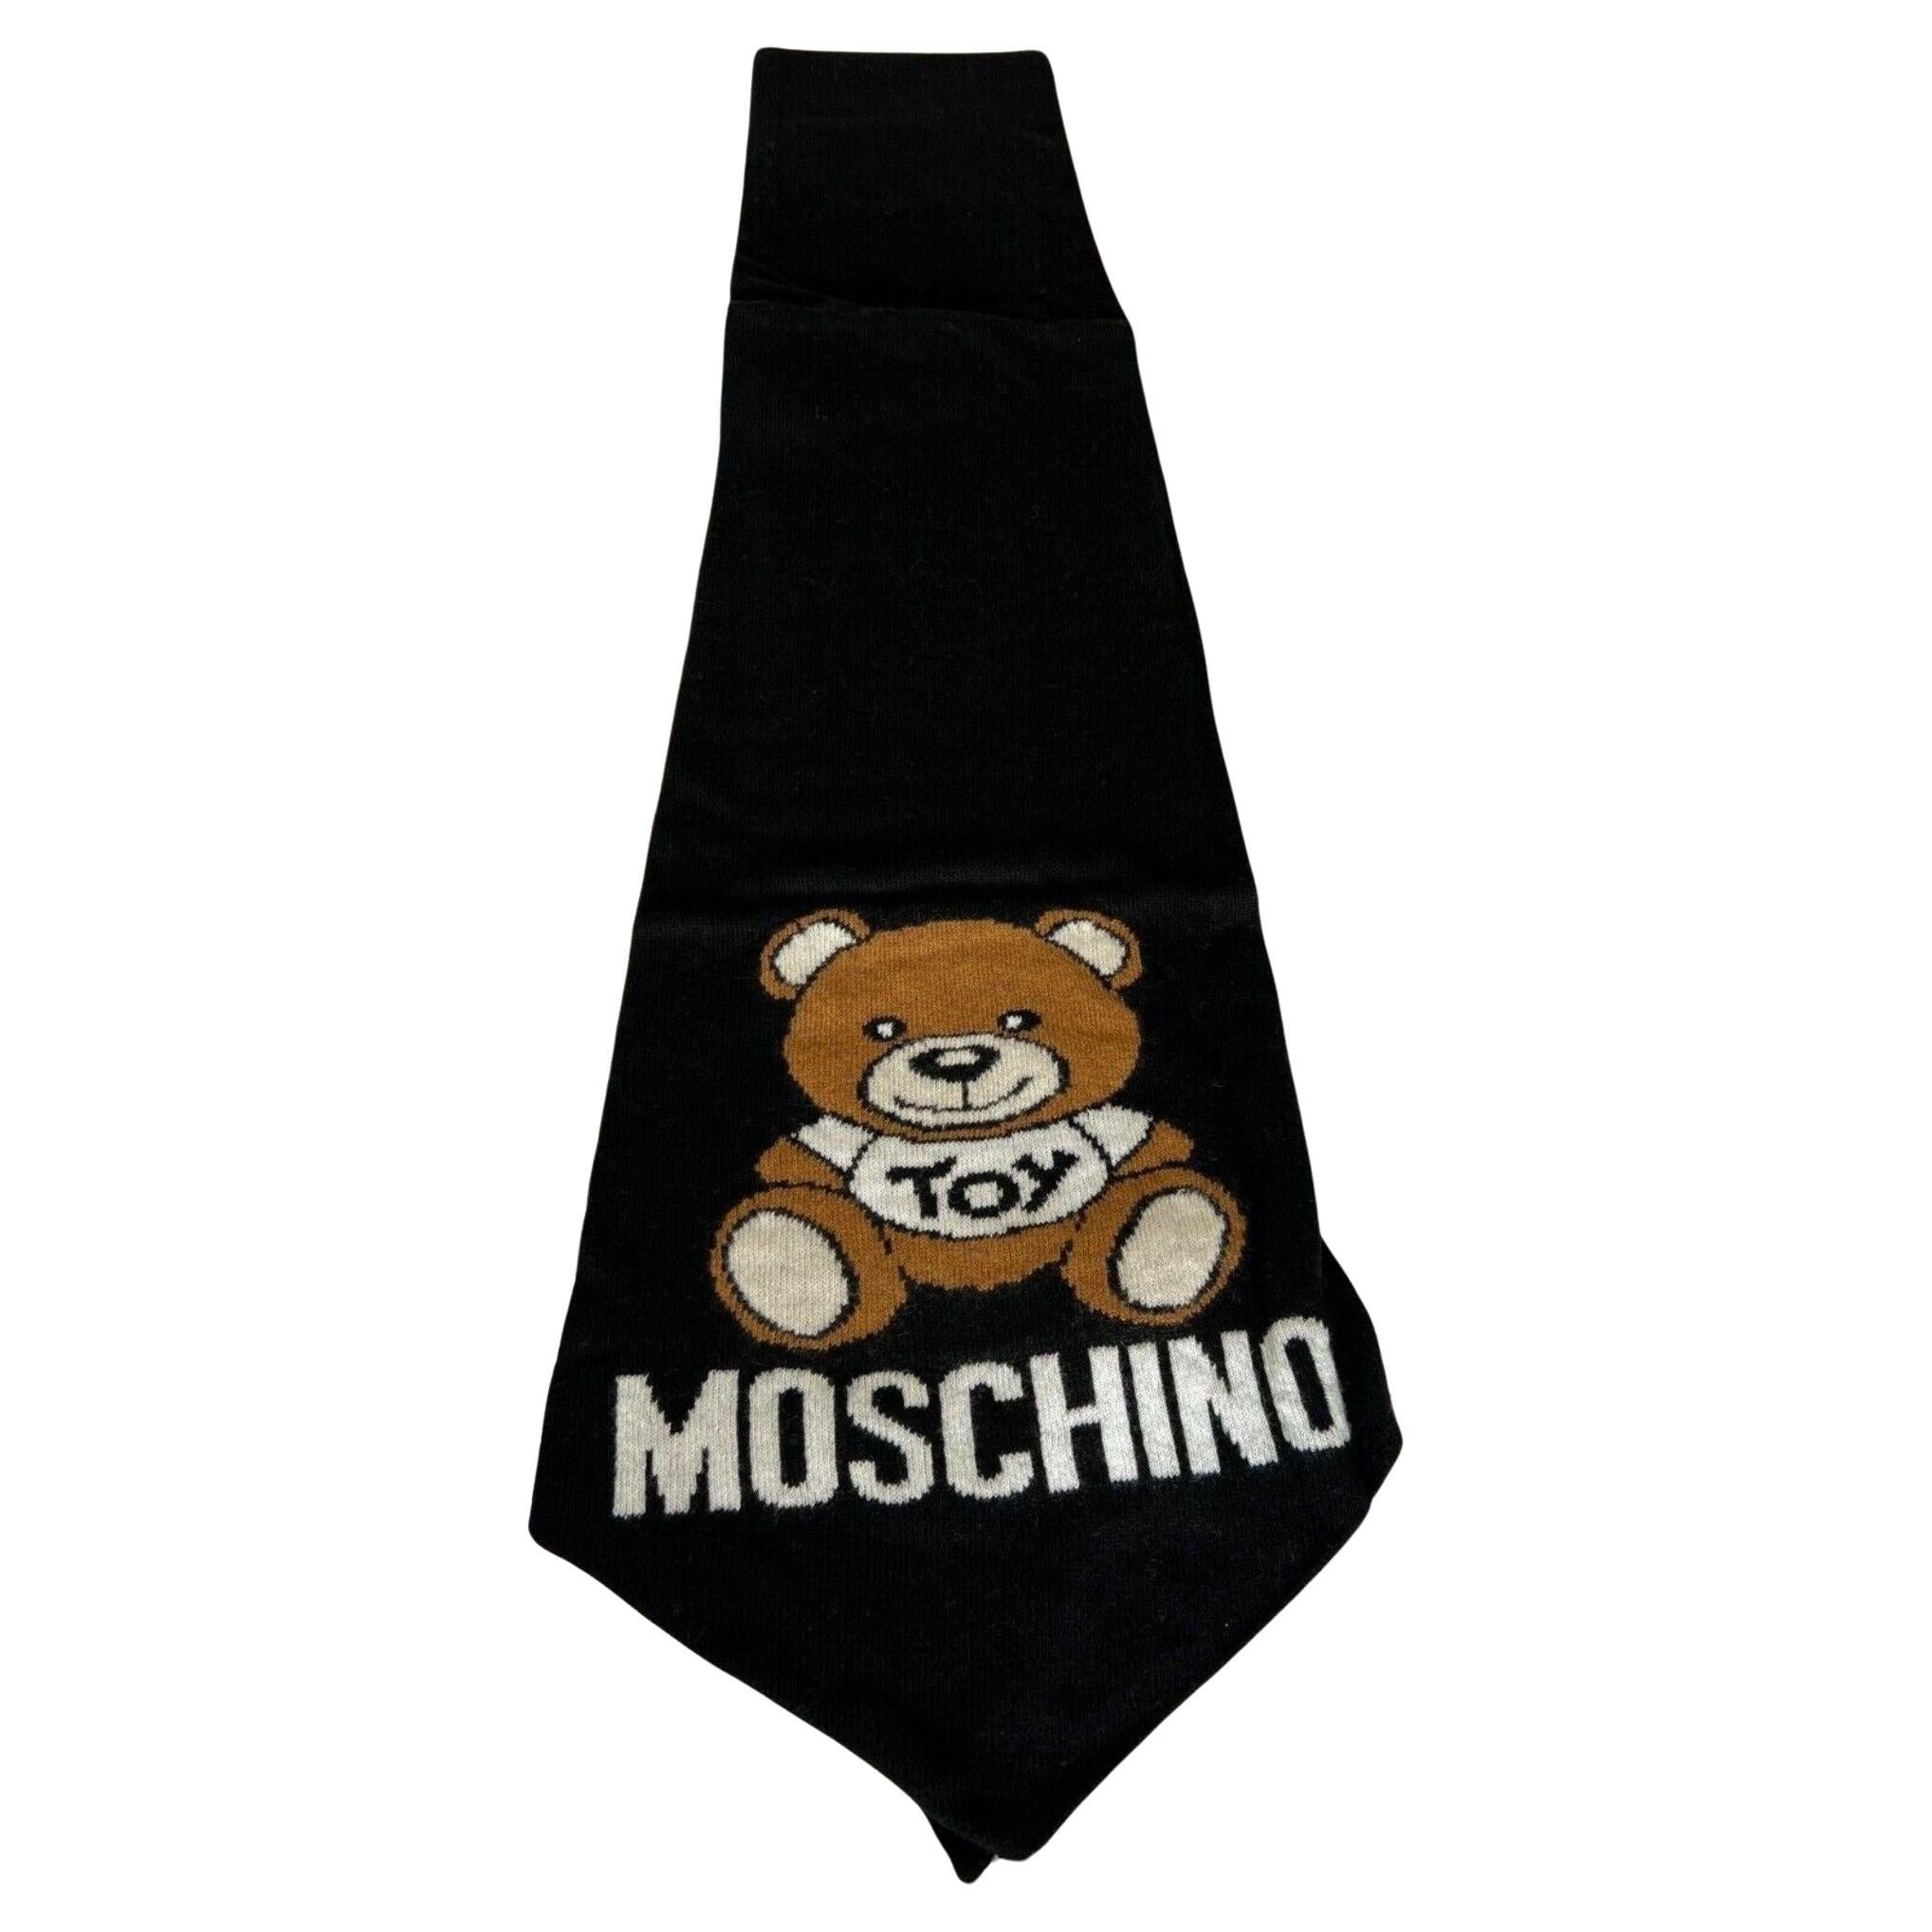 Moschino Couture Teddy Bear Black Scarf Tie Shaped by Jeremy Scott